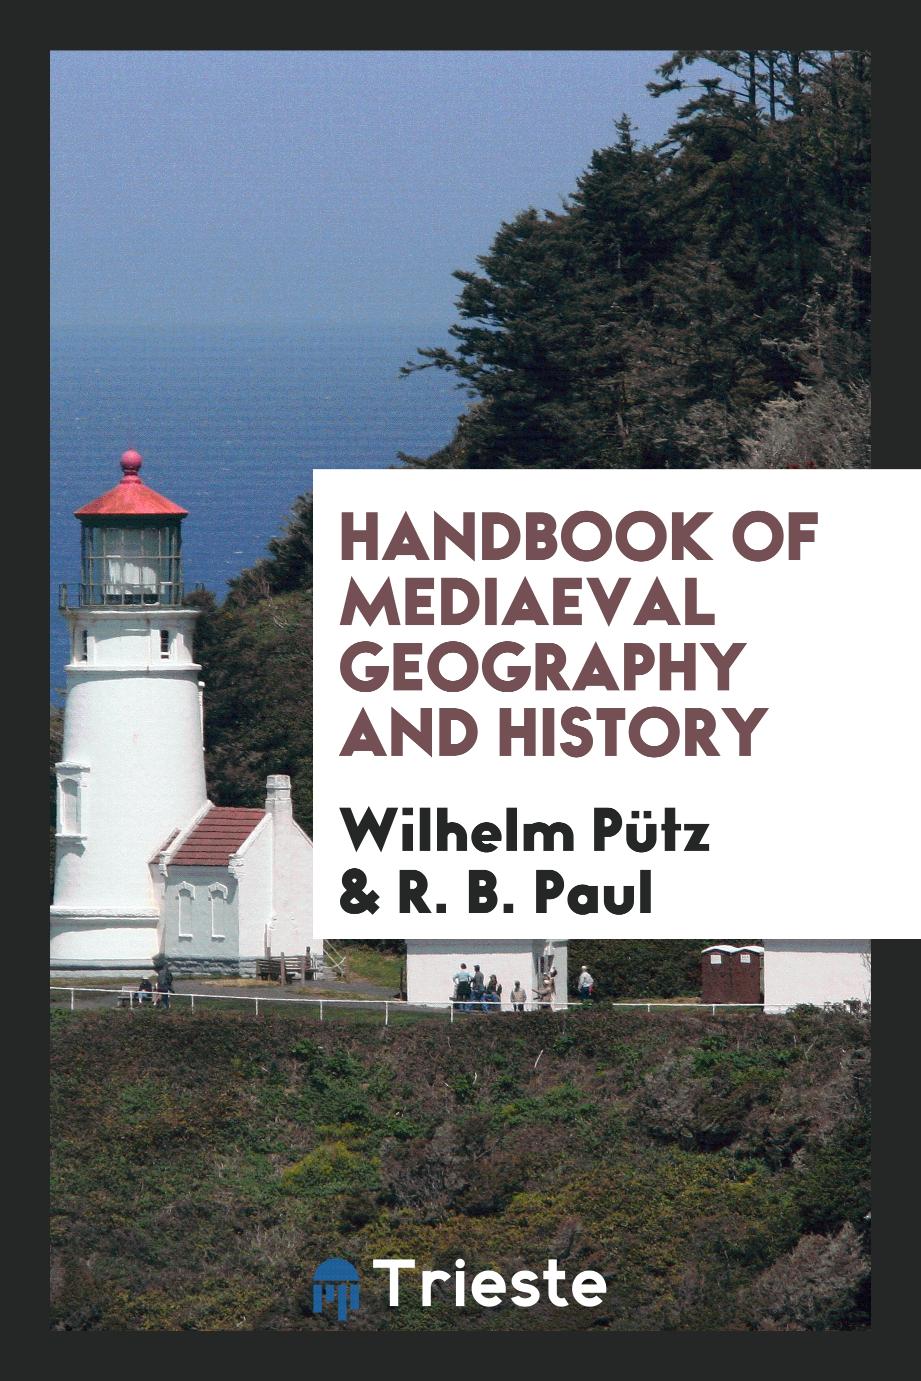 Handbook of mediaeval geography and history